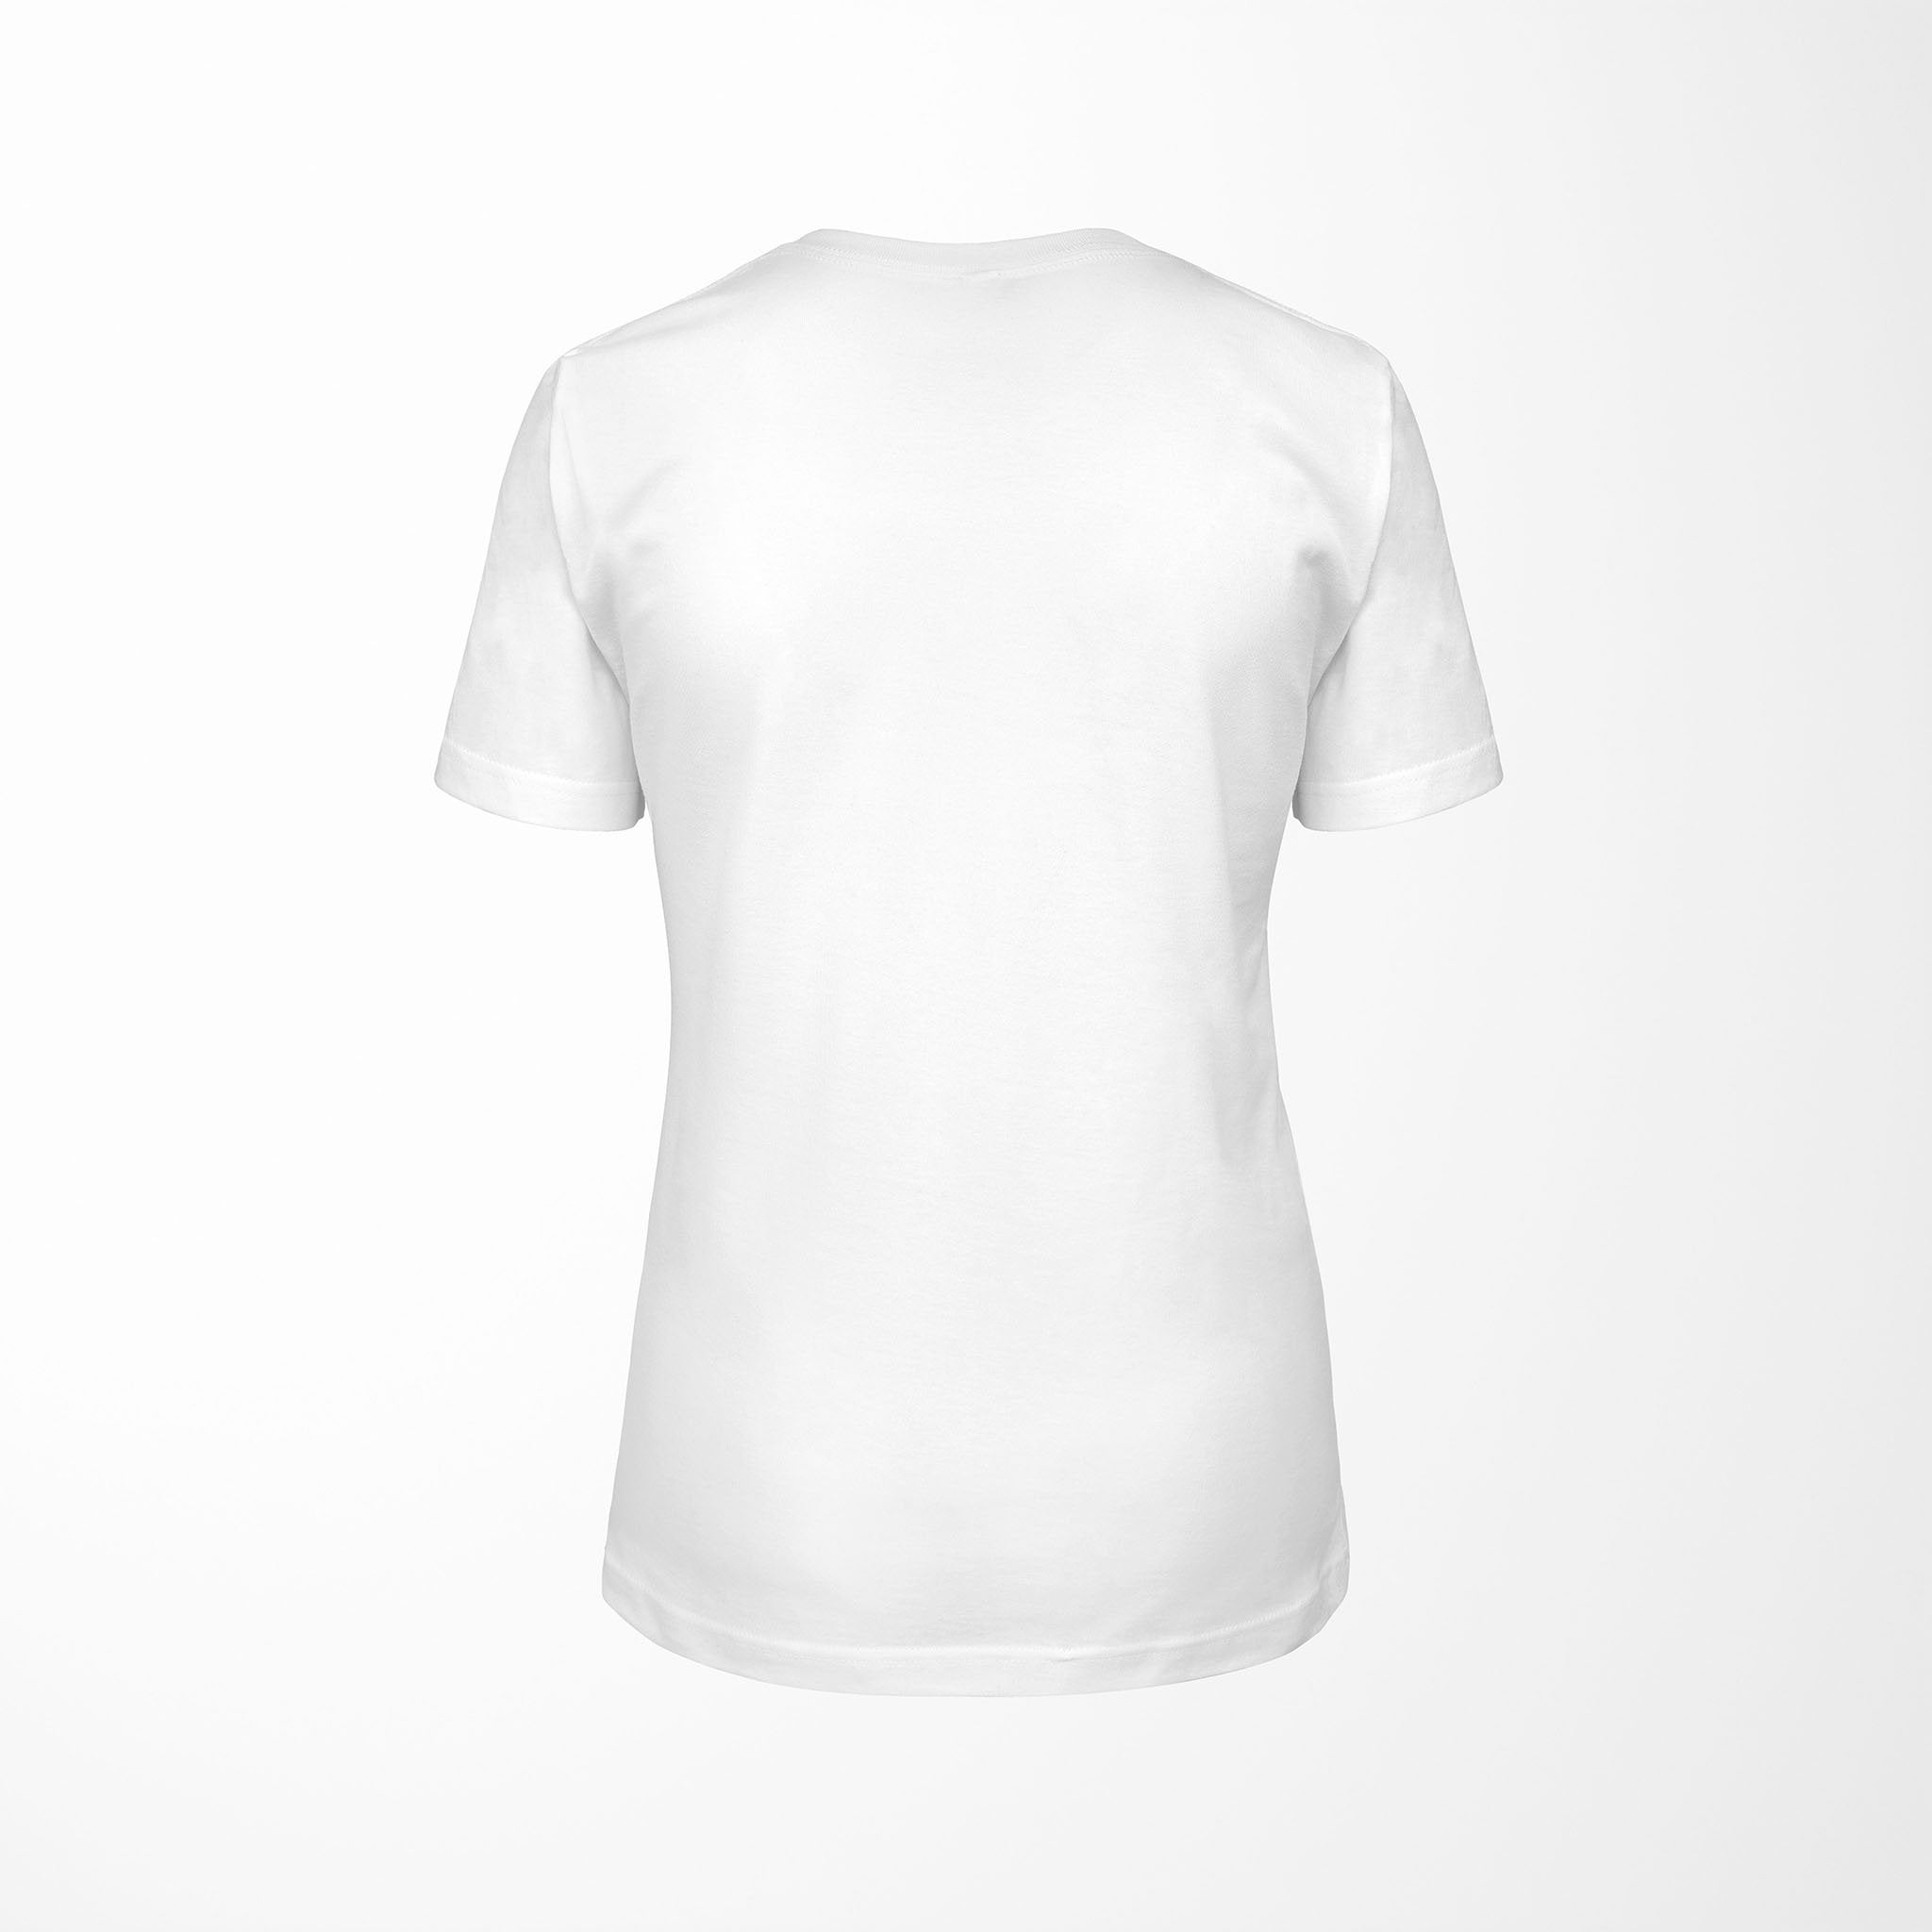 RIBBON Relaxed Fit Women's 100% Cotton White T-Shirt back